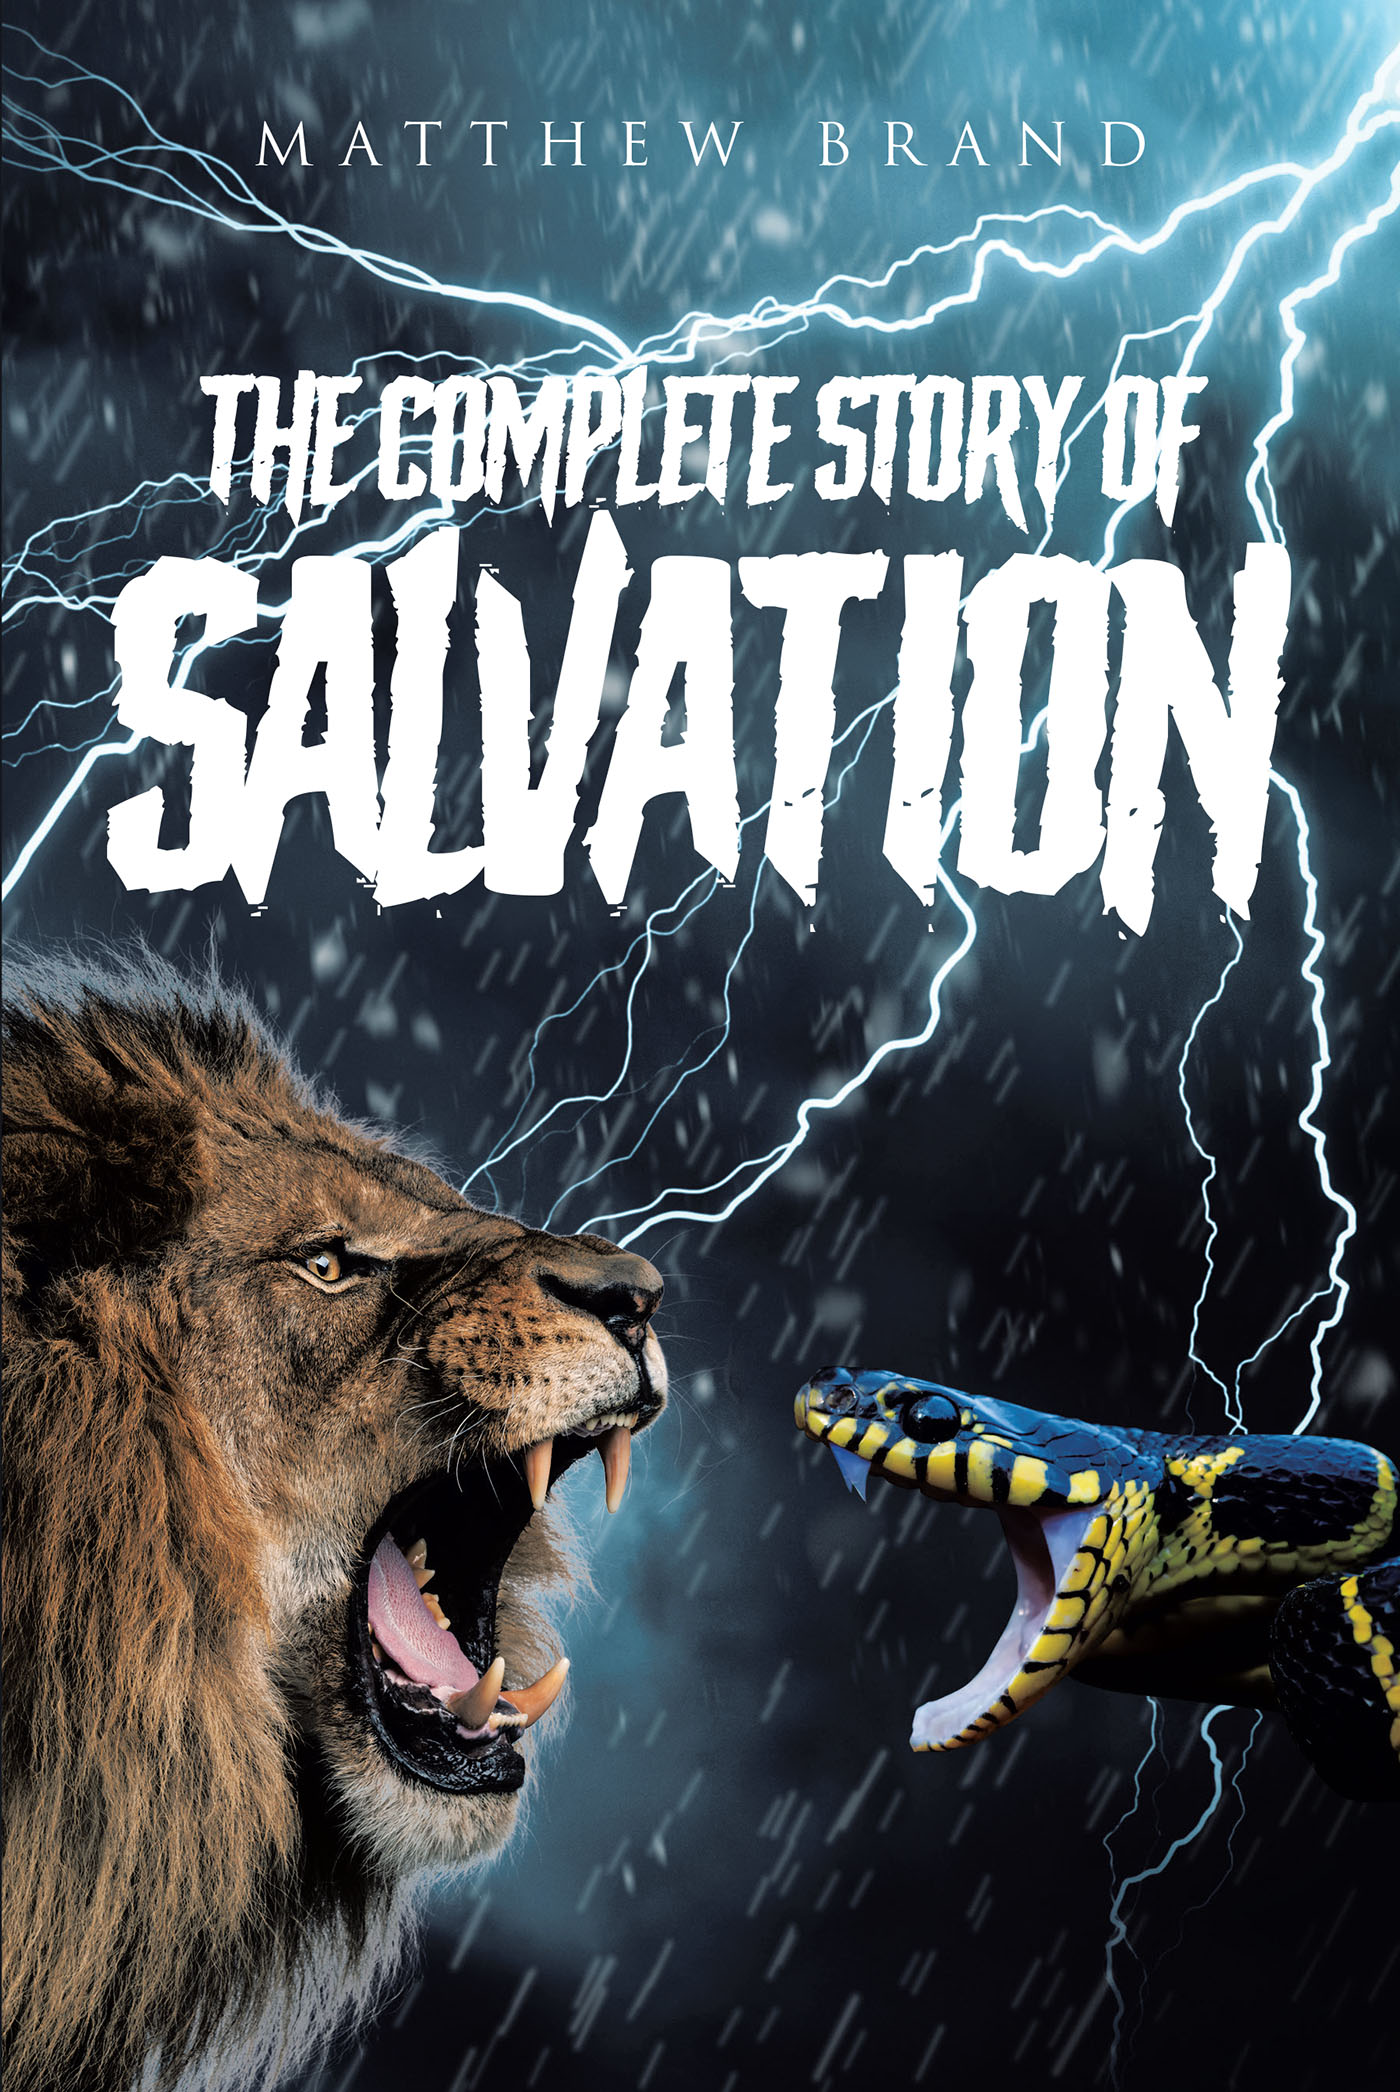 Matthew Brand’s New Book, "The Complete Story of Salvation," is an Encouraging and Inspirational Story That Follows the Redemption That Can be Found Through God